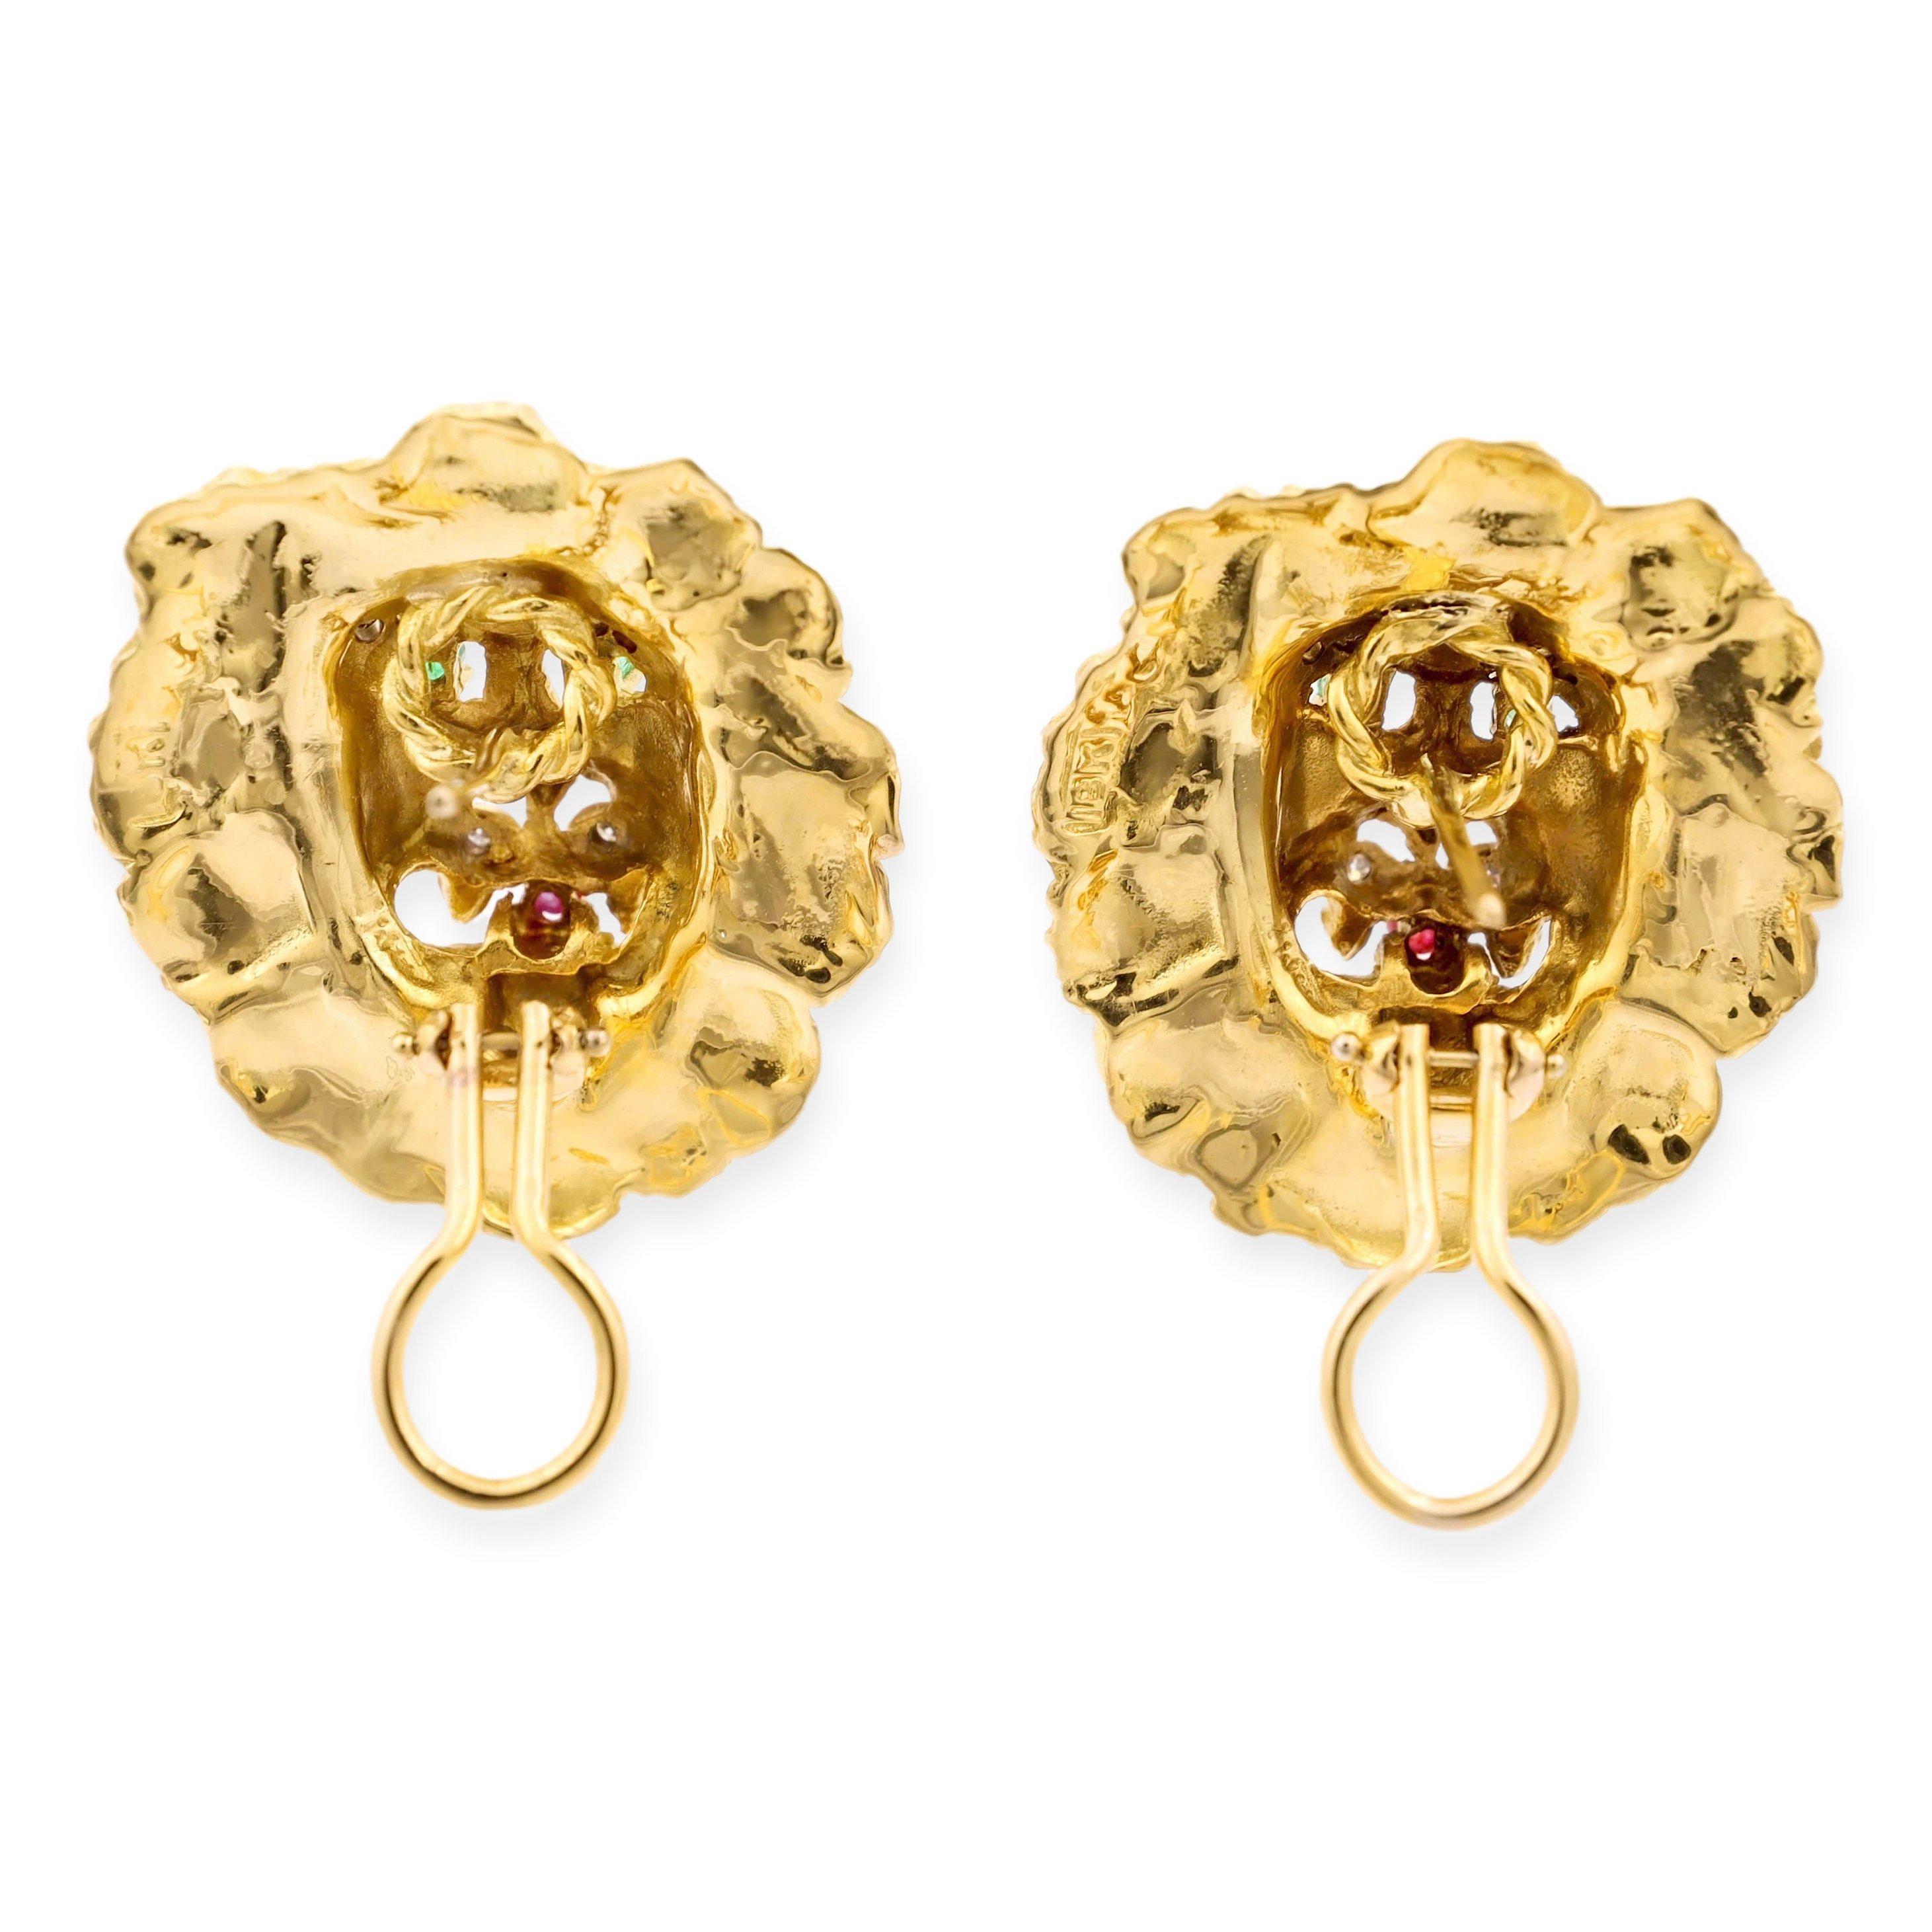 Iconic Lion motif earrings designed by Hammerman Brothers finely crafted in 18 karat yellow gold with a highly detailed gold finish adorned with single cut diamond eyebrows and whiskers. The eyes have inset round emeralds and the mouth holds